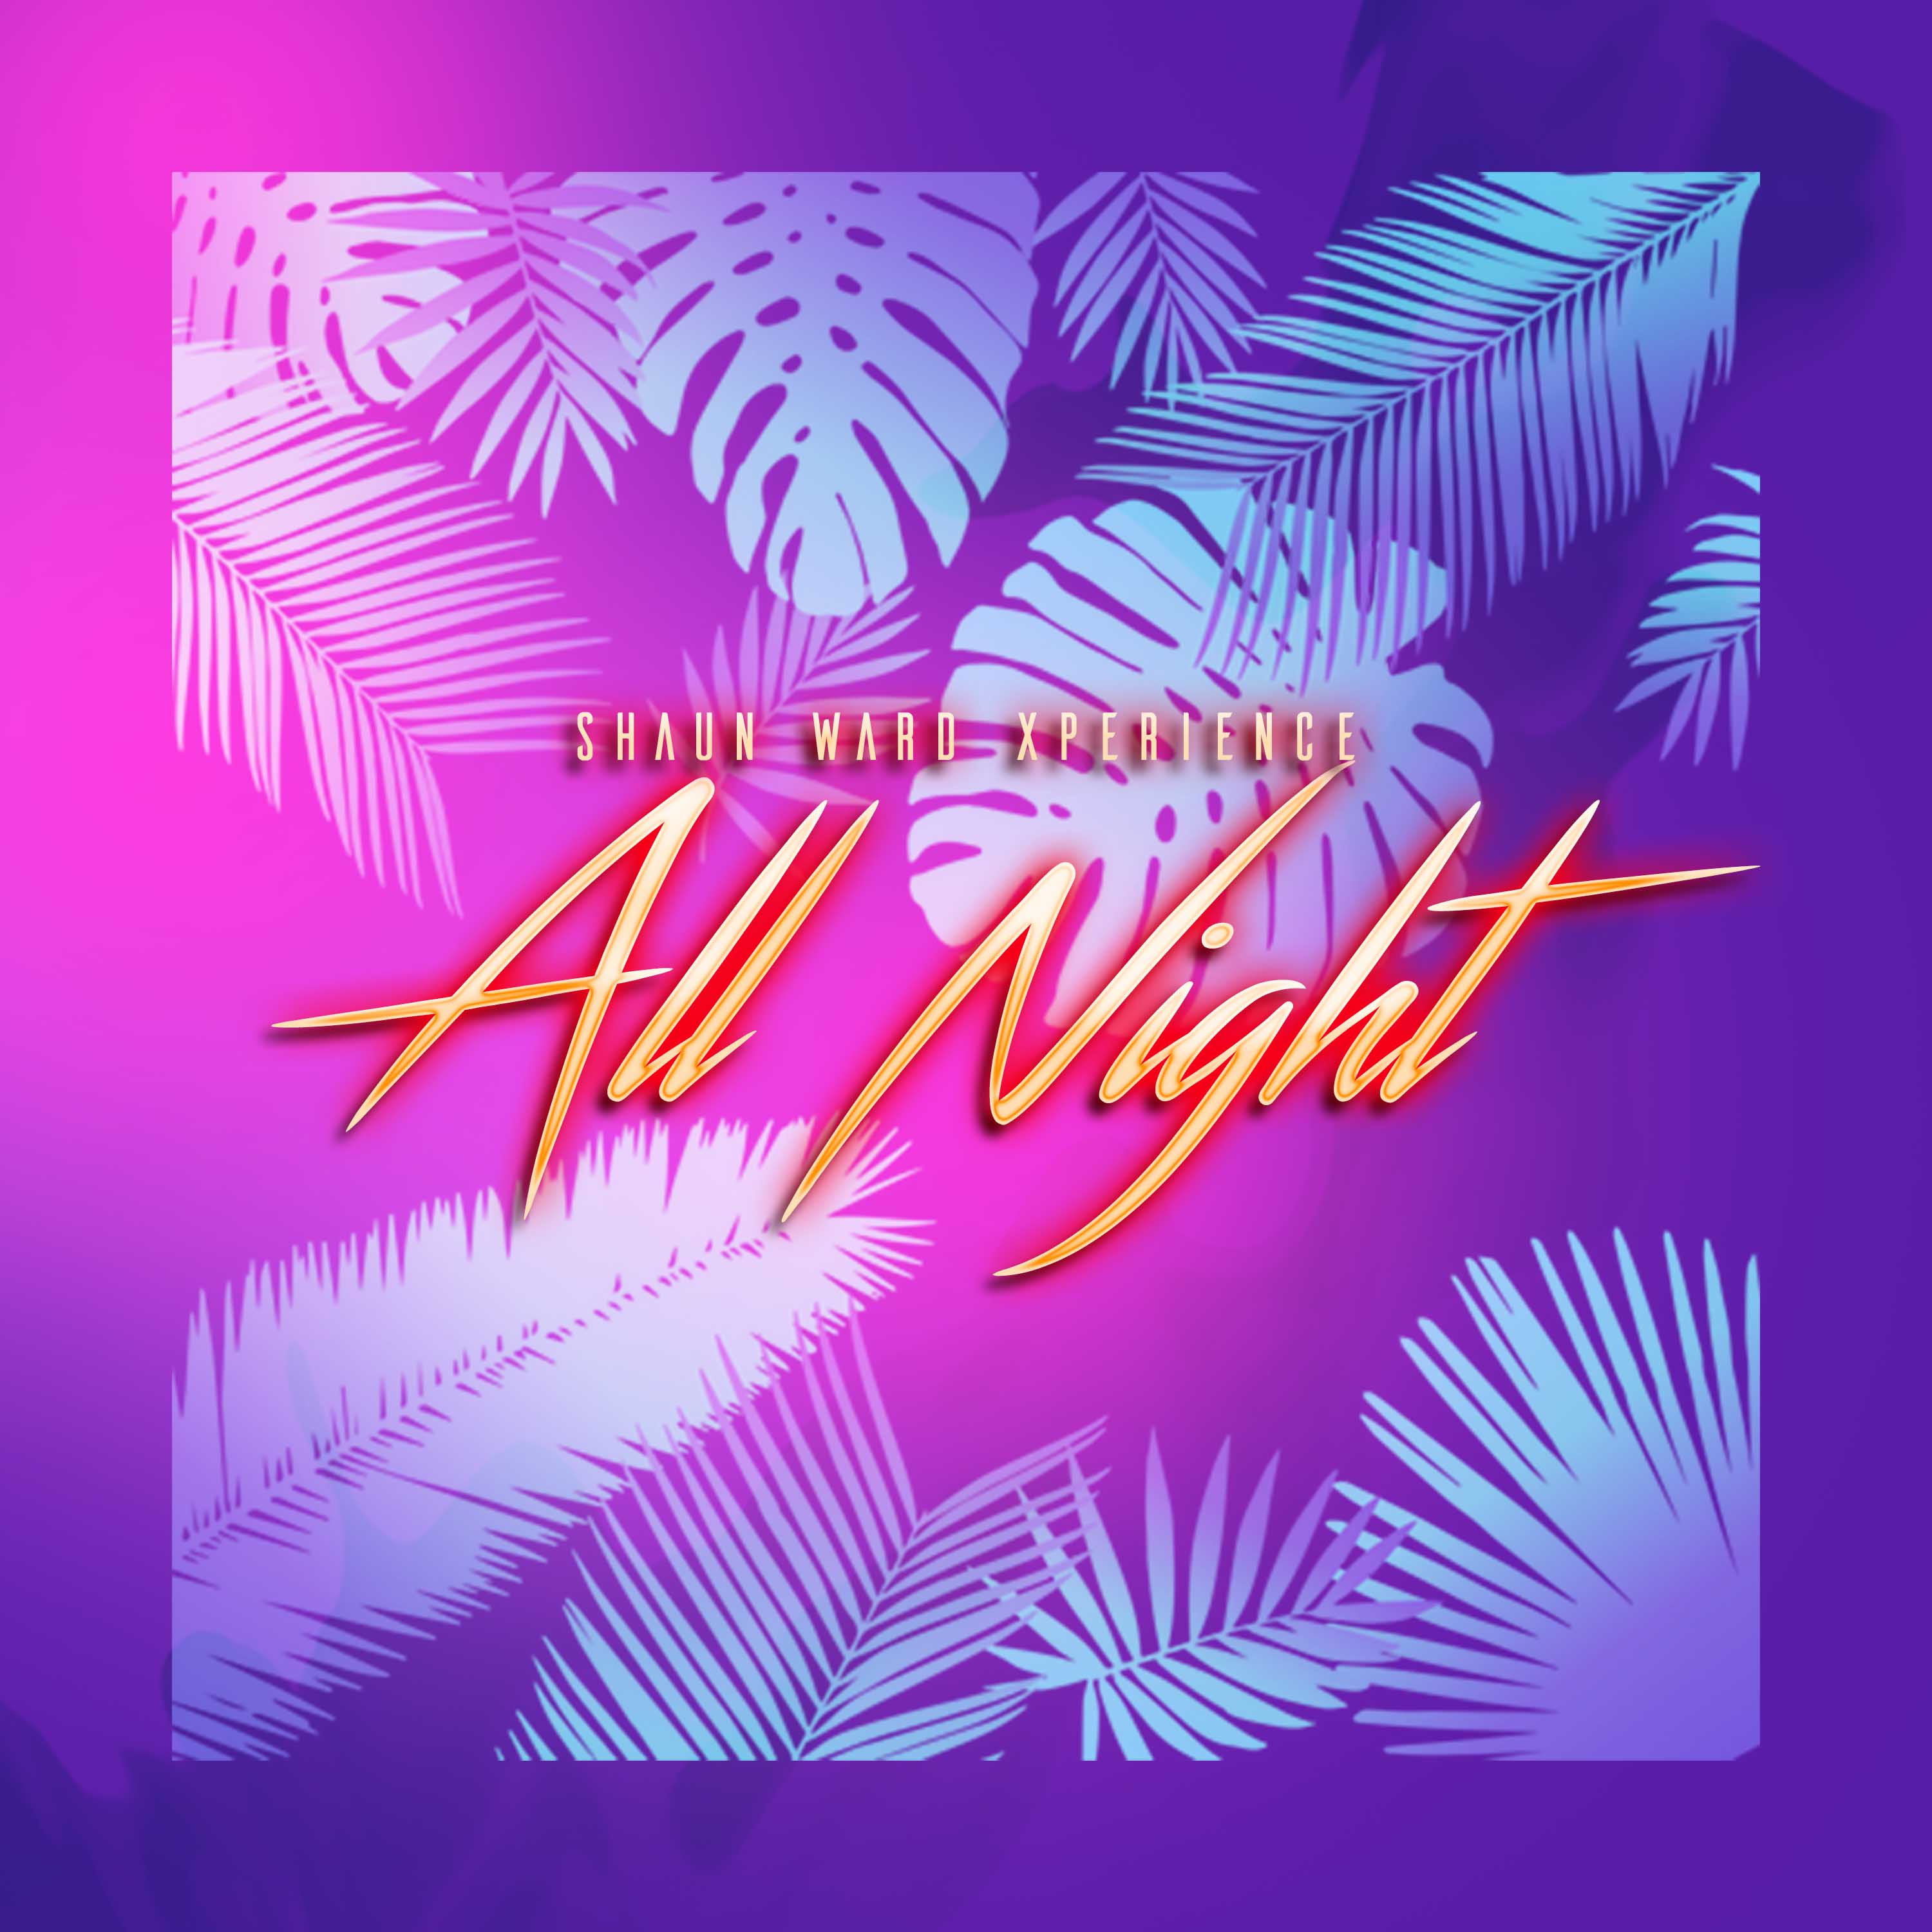 Art for All Night by Shaun Ward Xperience